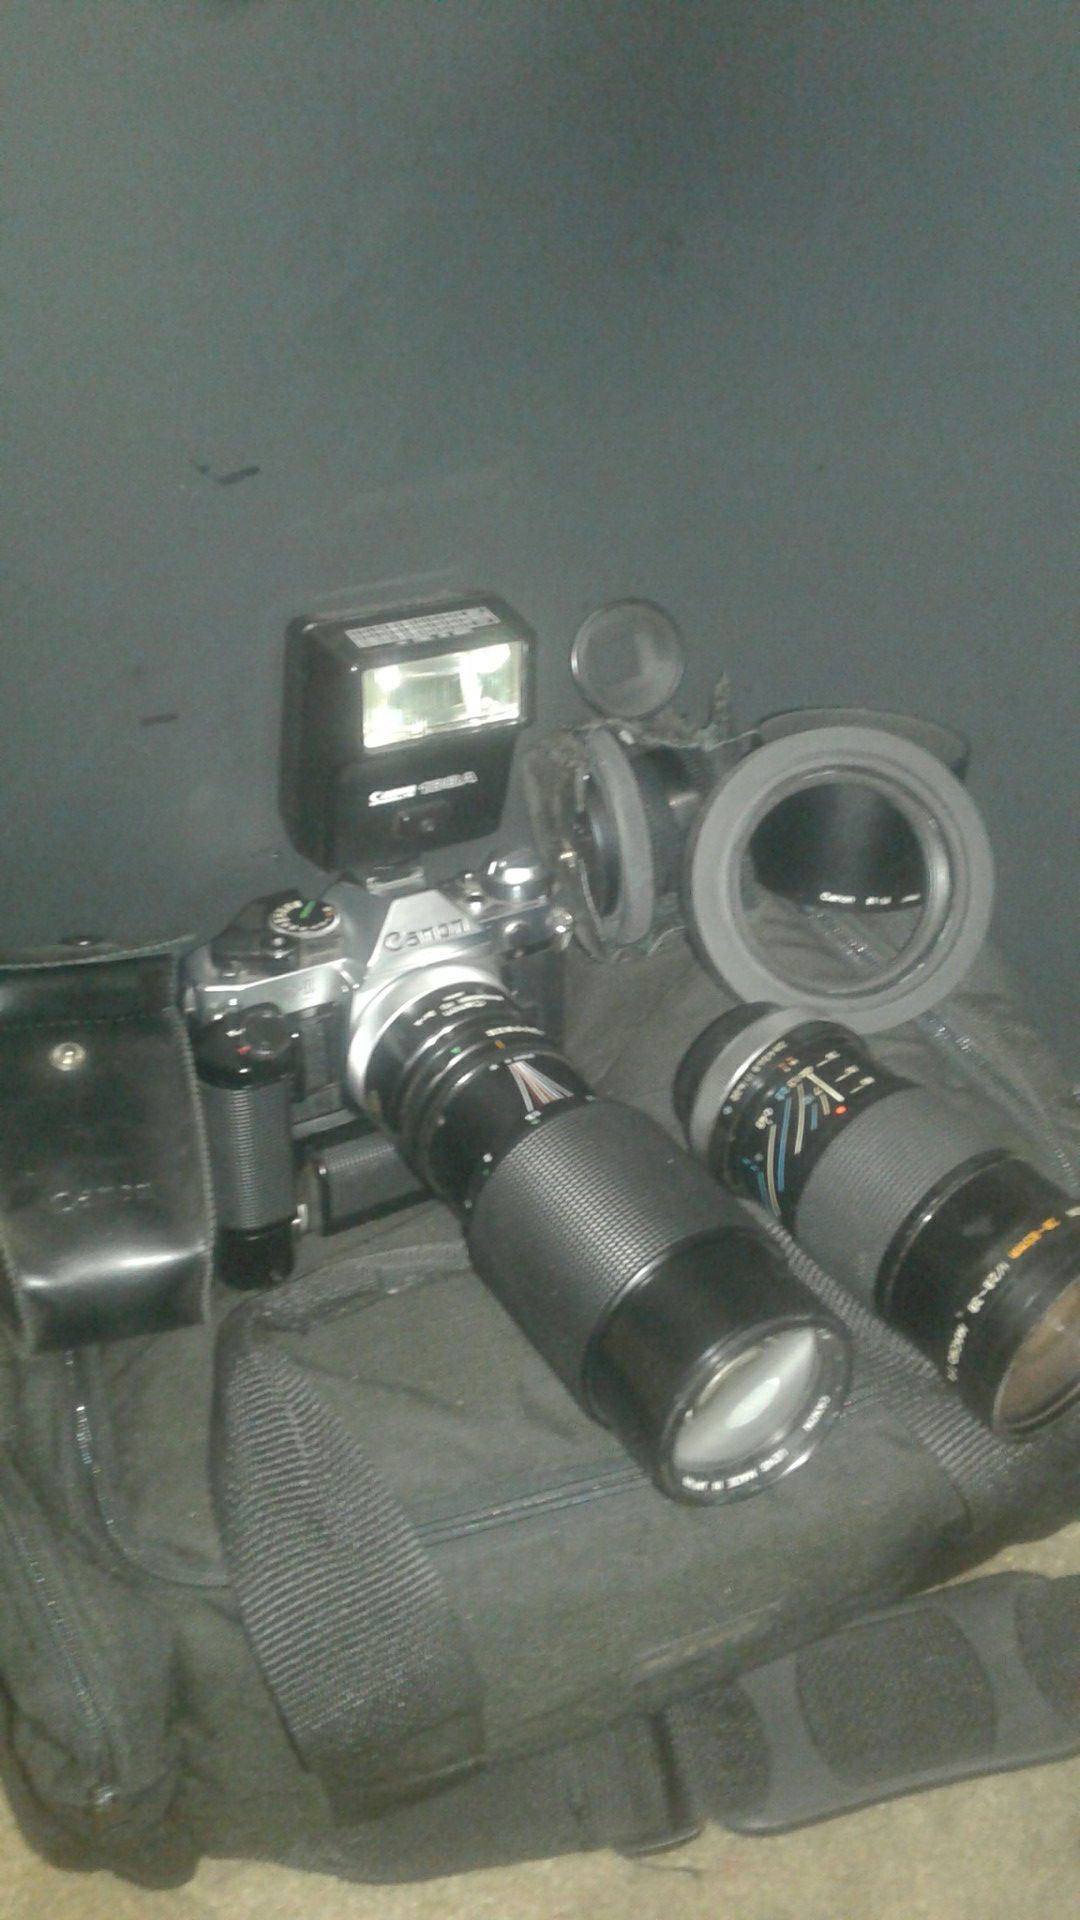 CANON CAMERA, AE-1 program with multiple lenses and batteri